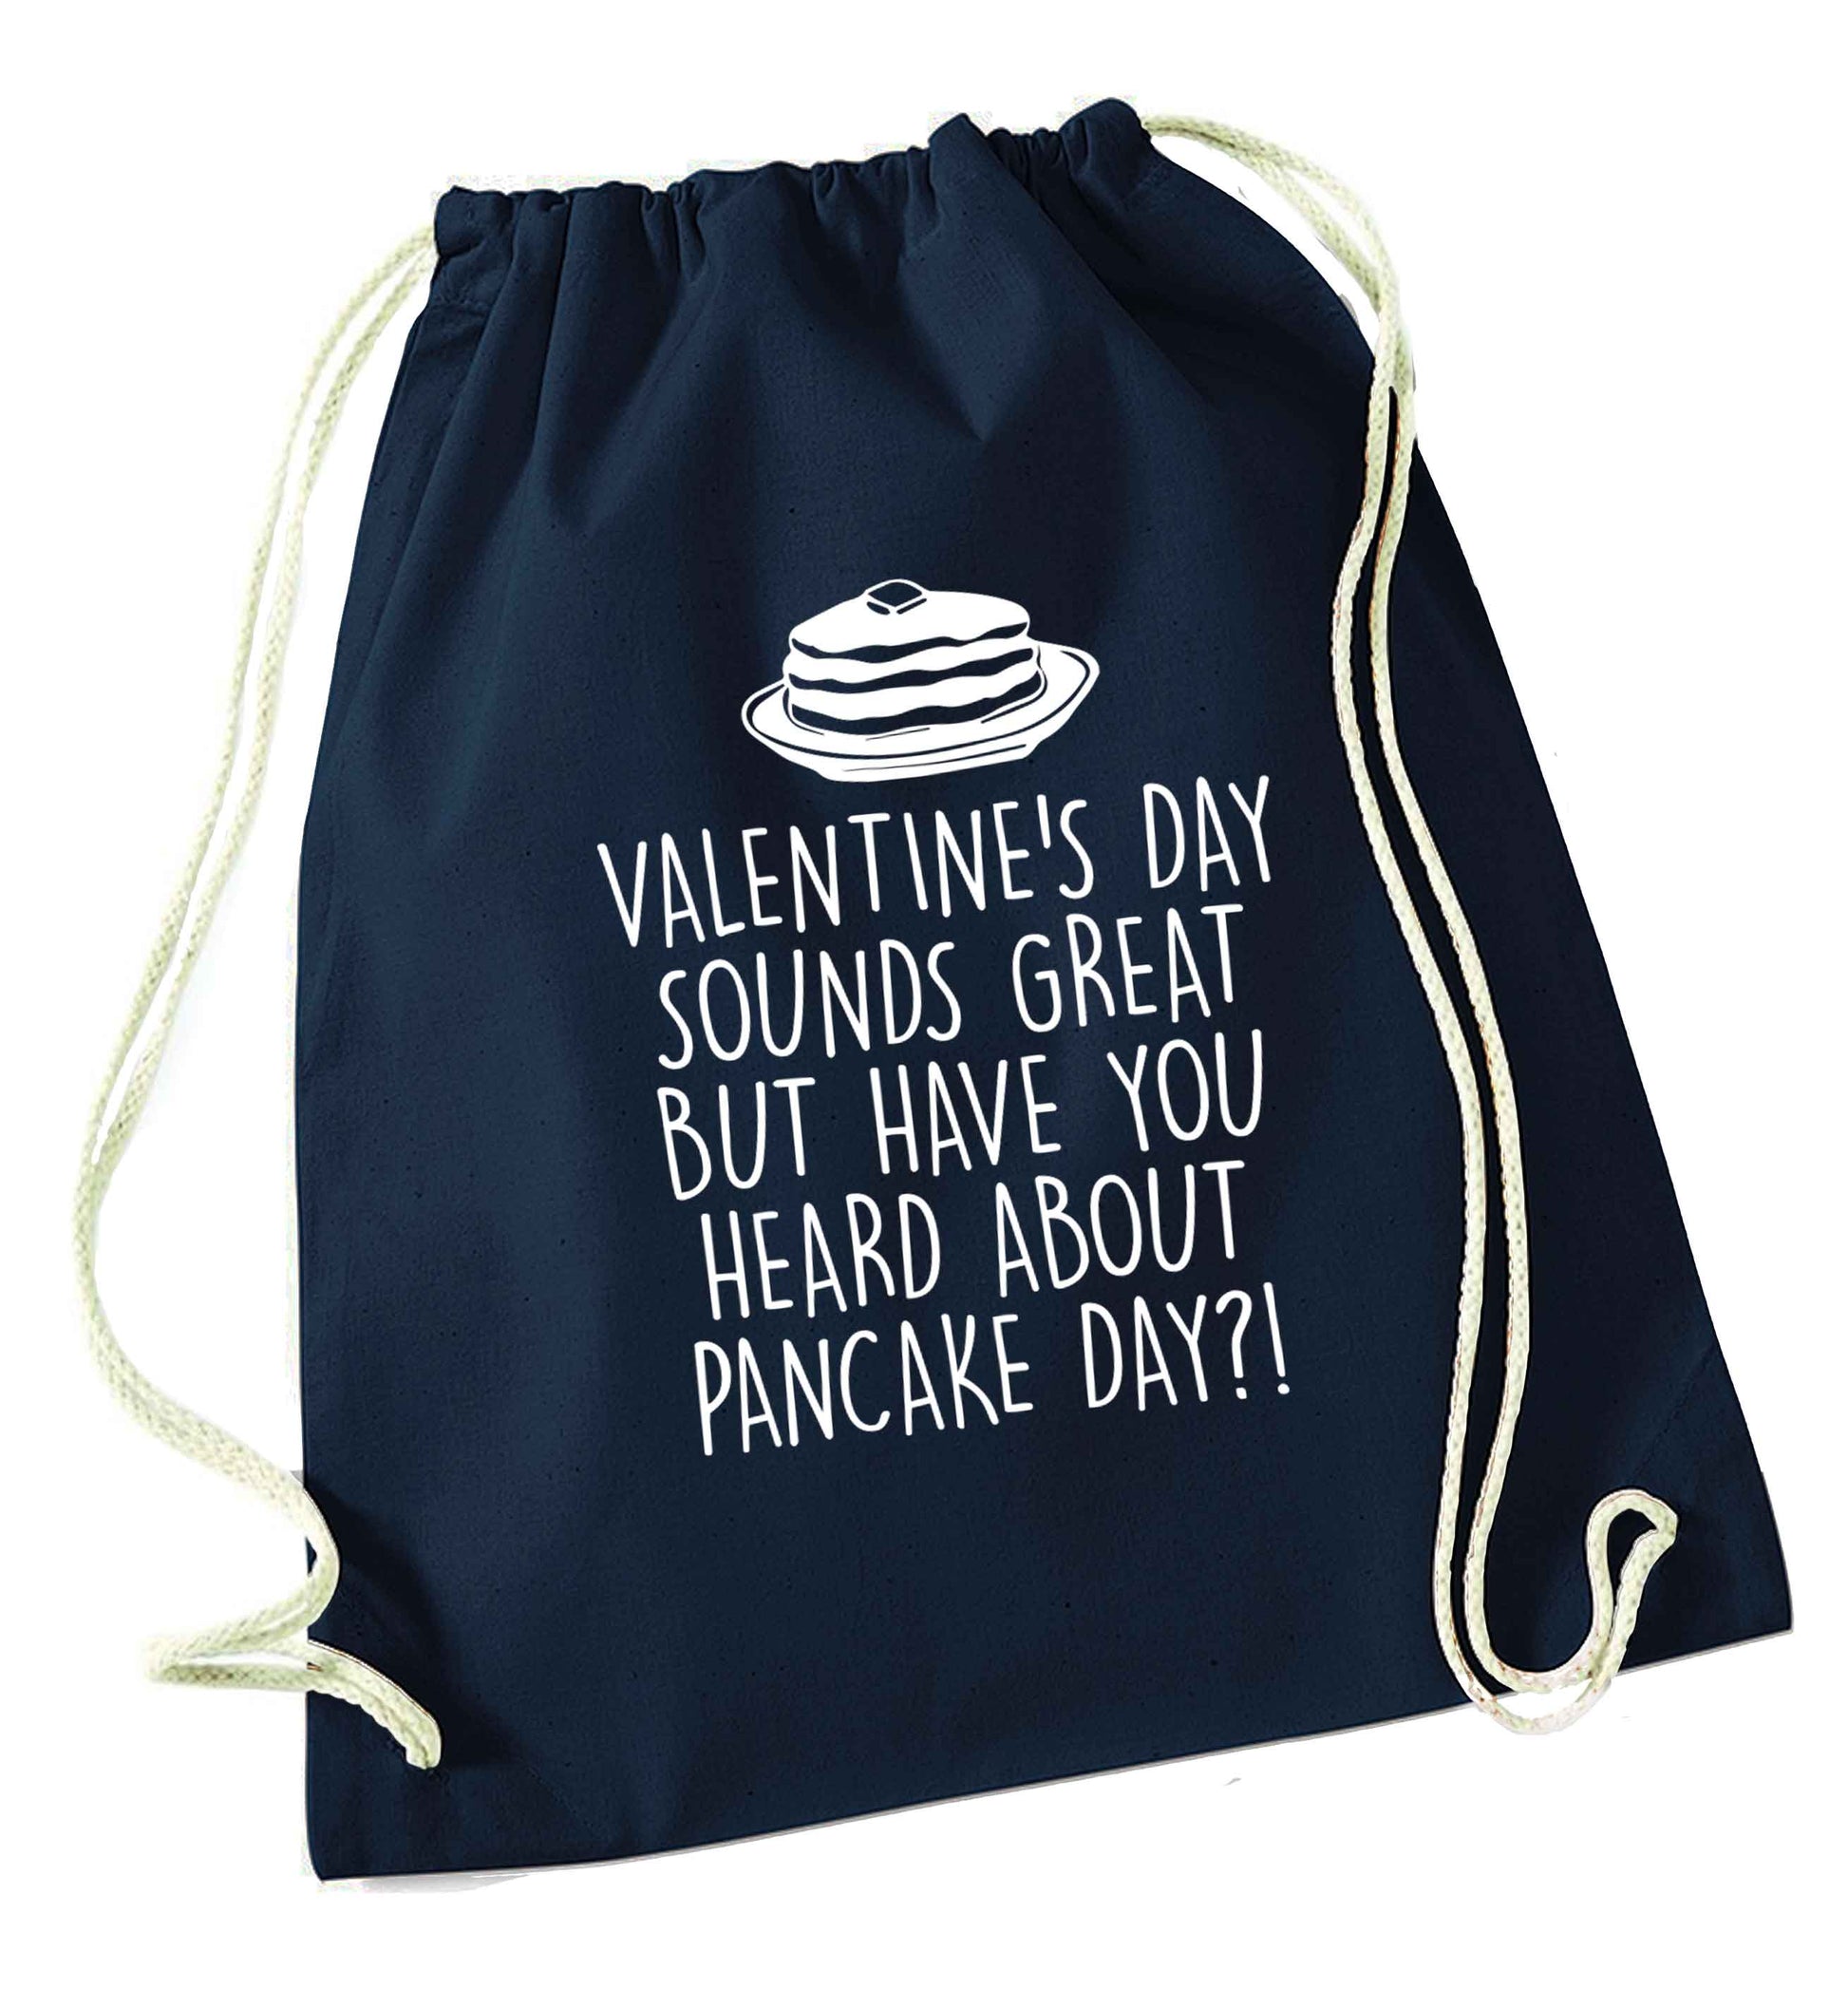 Valentine's day sounds great but have you heard about pancake day?! navy drawstring bag